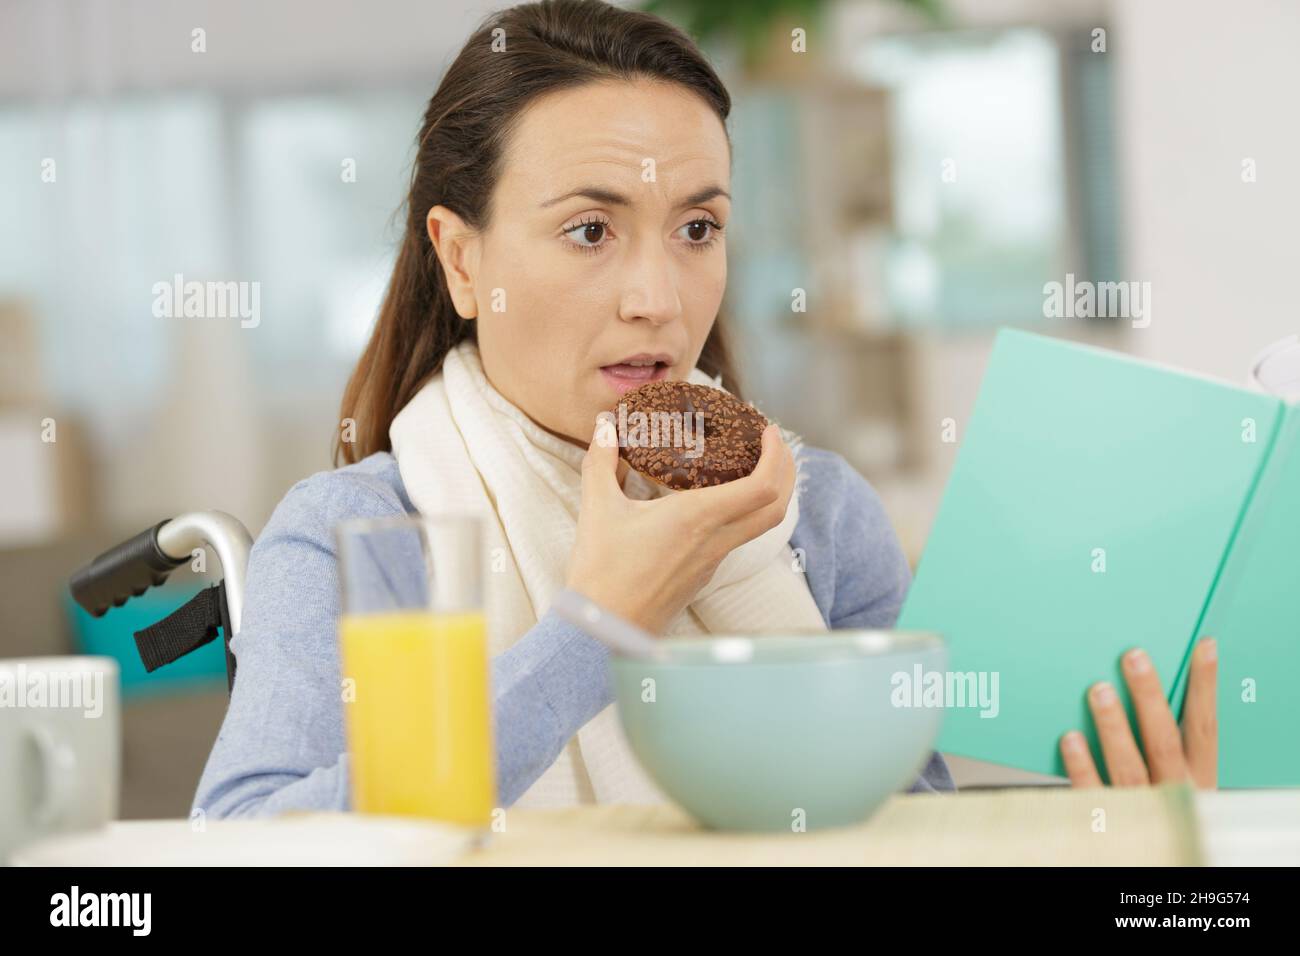 young disabled woman eating a donut while reading a book Stock Photo